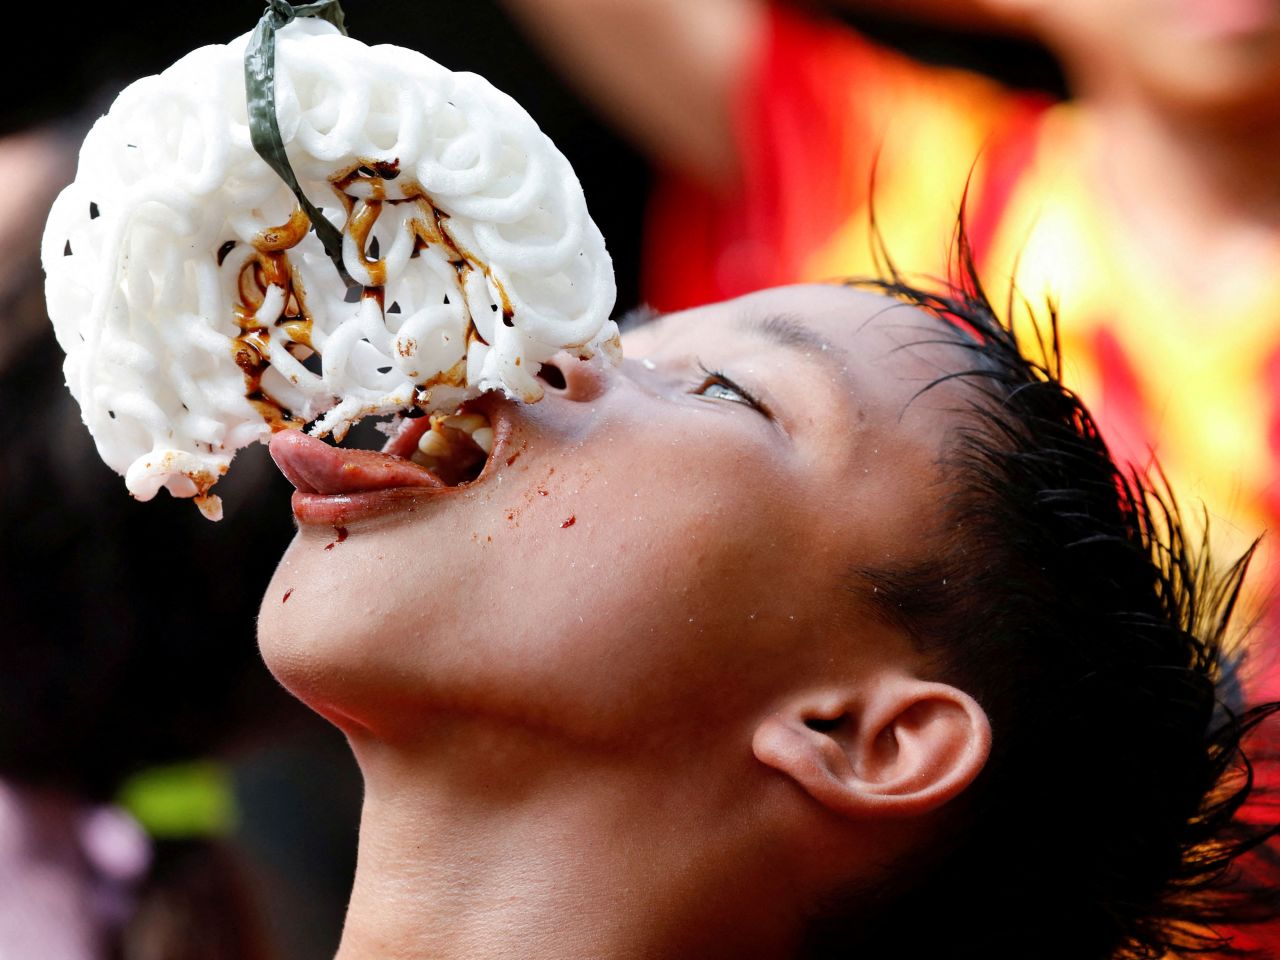 A boy takes part in a competition during Independence Day celebrations in Jakarta, Indonesia, on Wednesday, August 17.